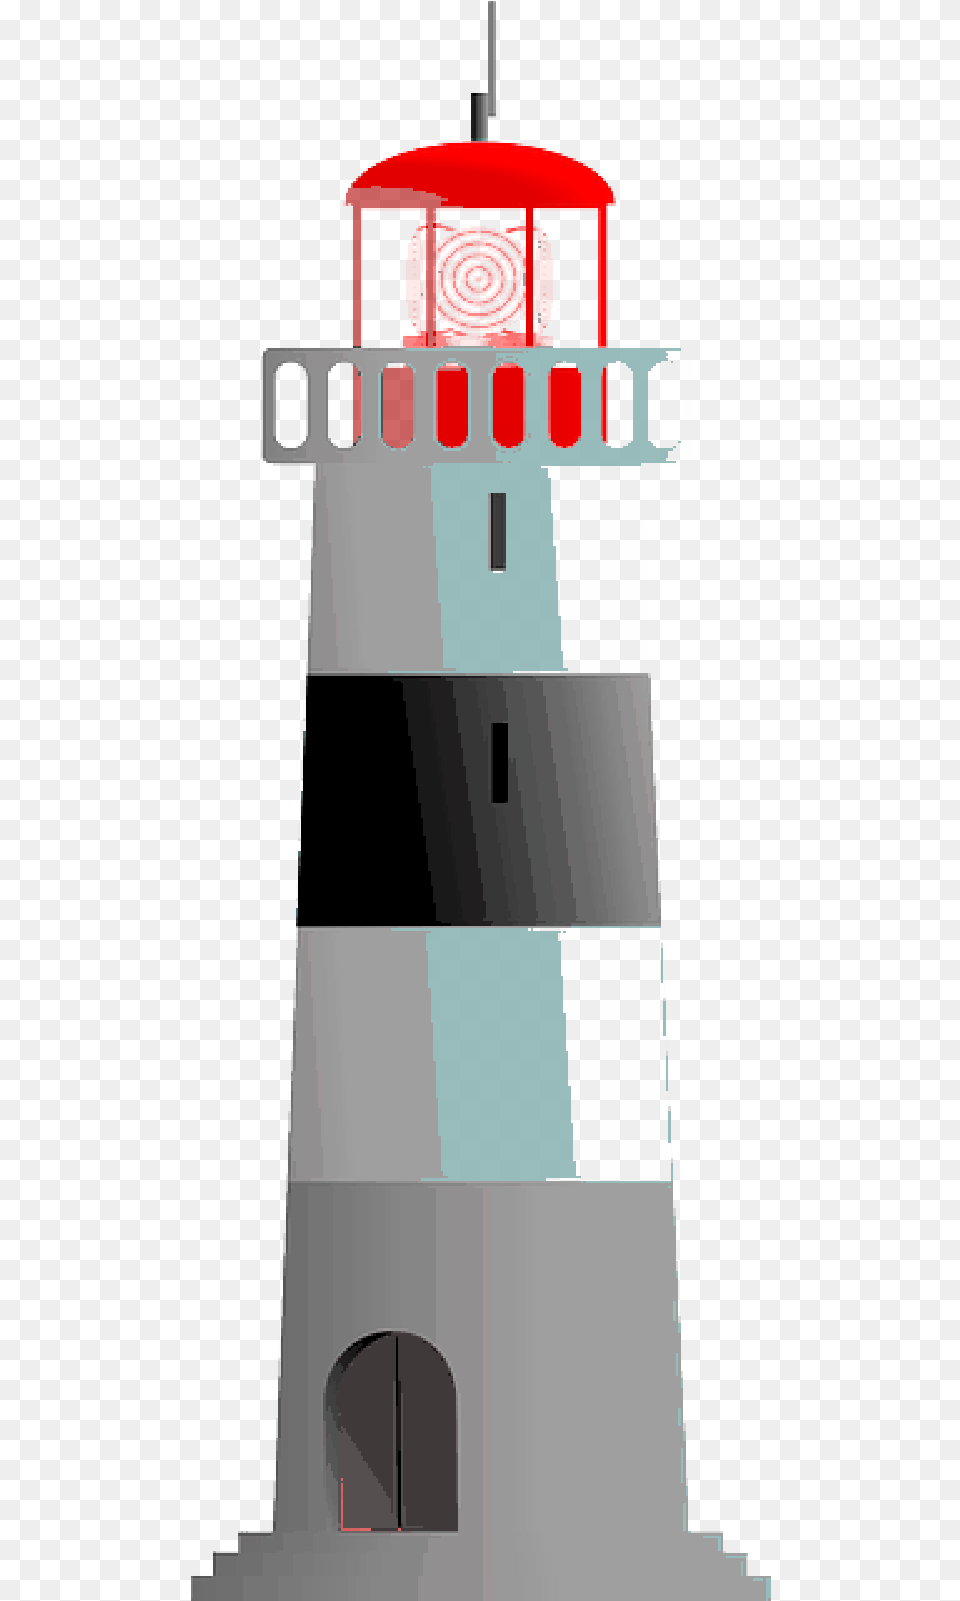 Clip Art Portable Network Graphics Vector Graphics Lighthouse Clip Art, Architecture, Building, Tower, Beacon Free Png Download